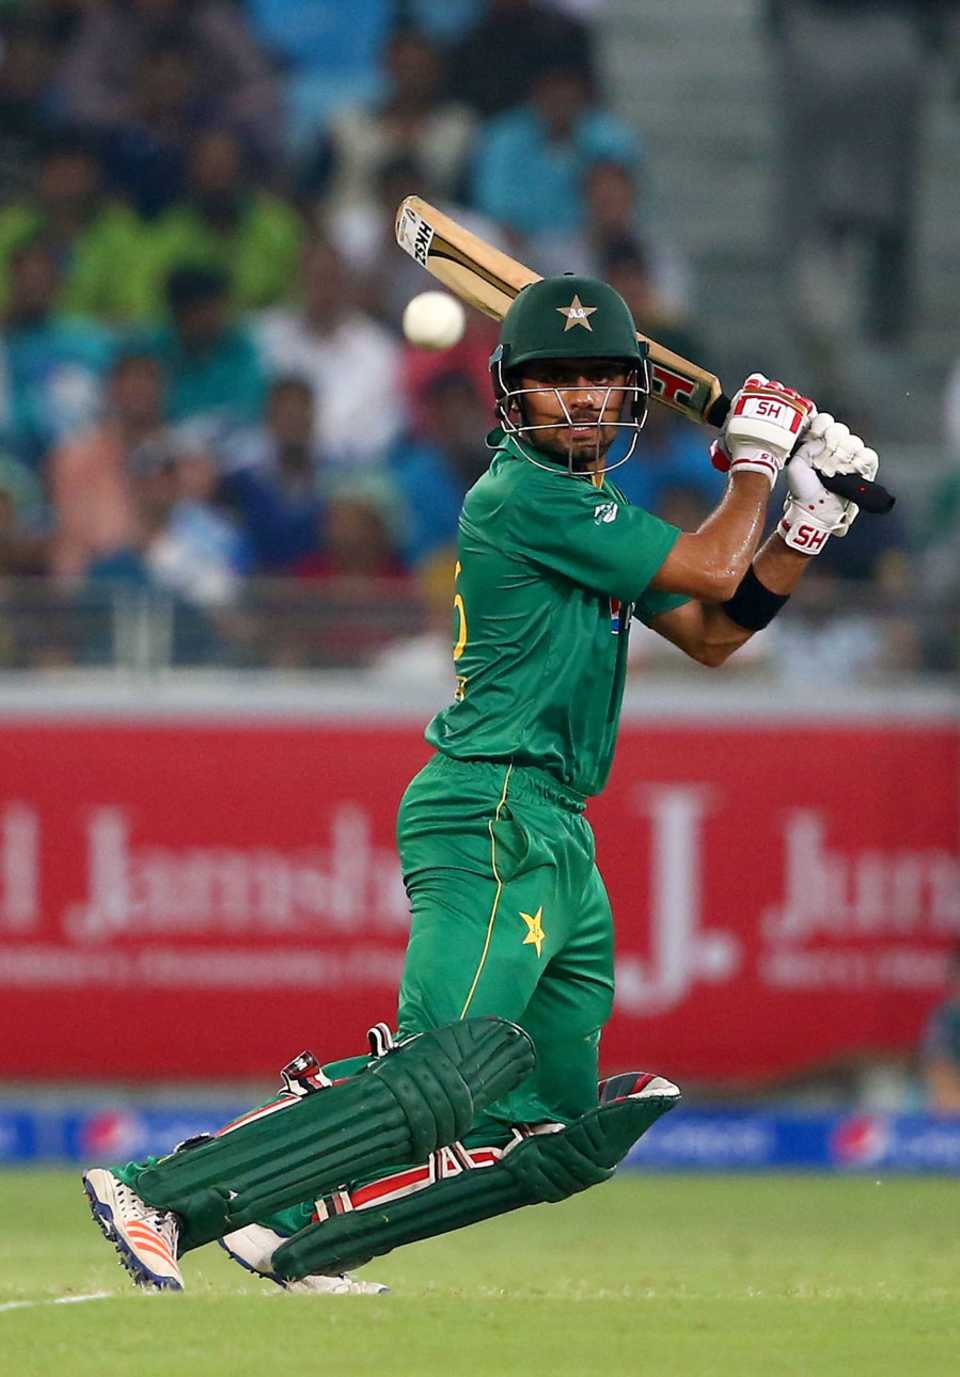 Babar Azam sends one racing through the off side